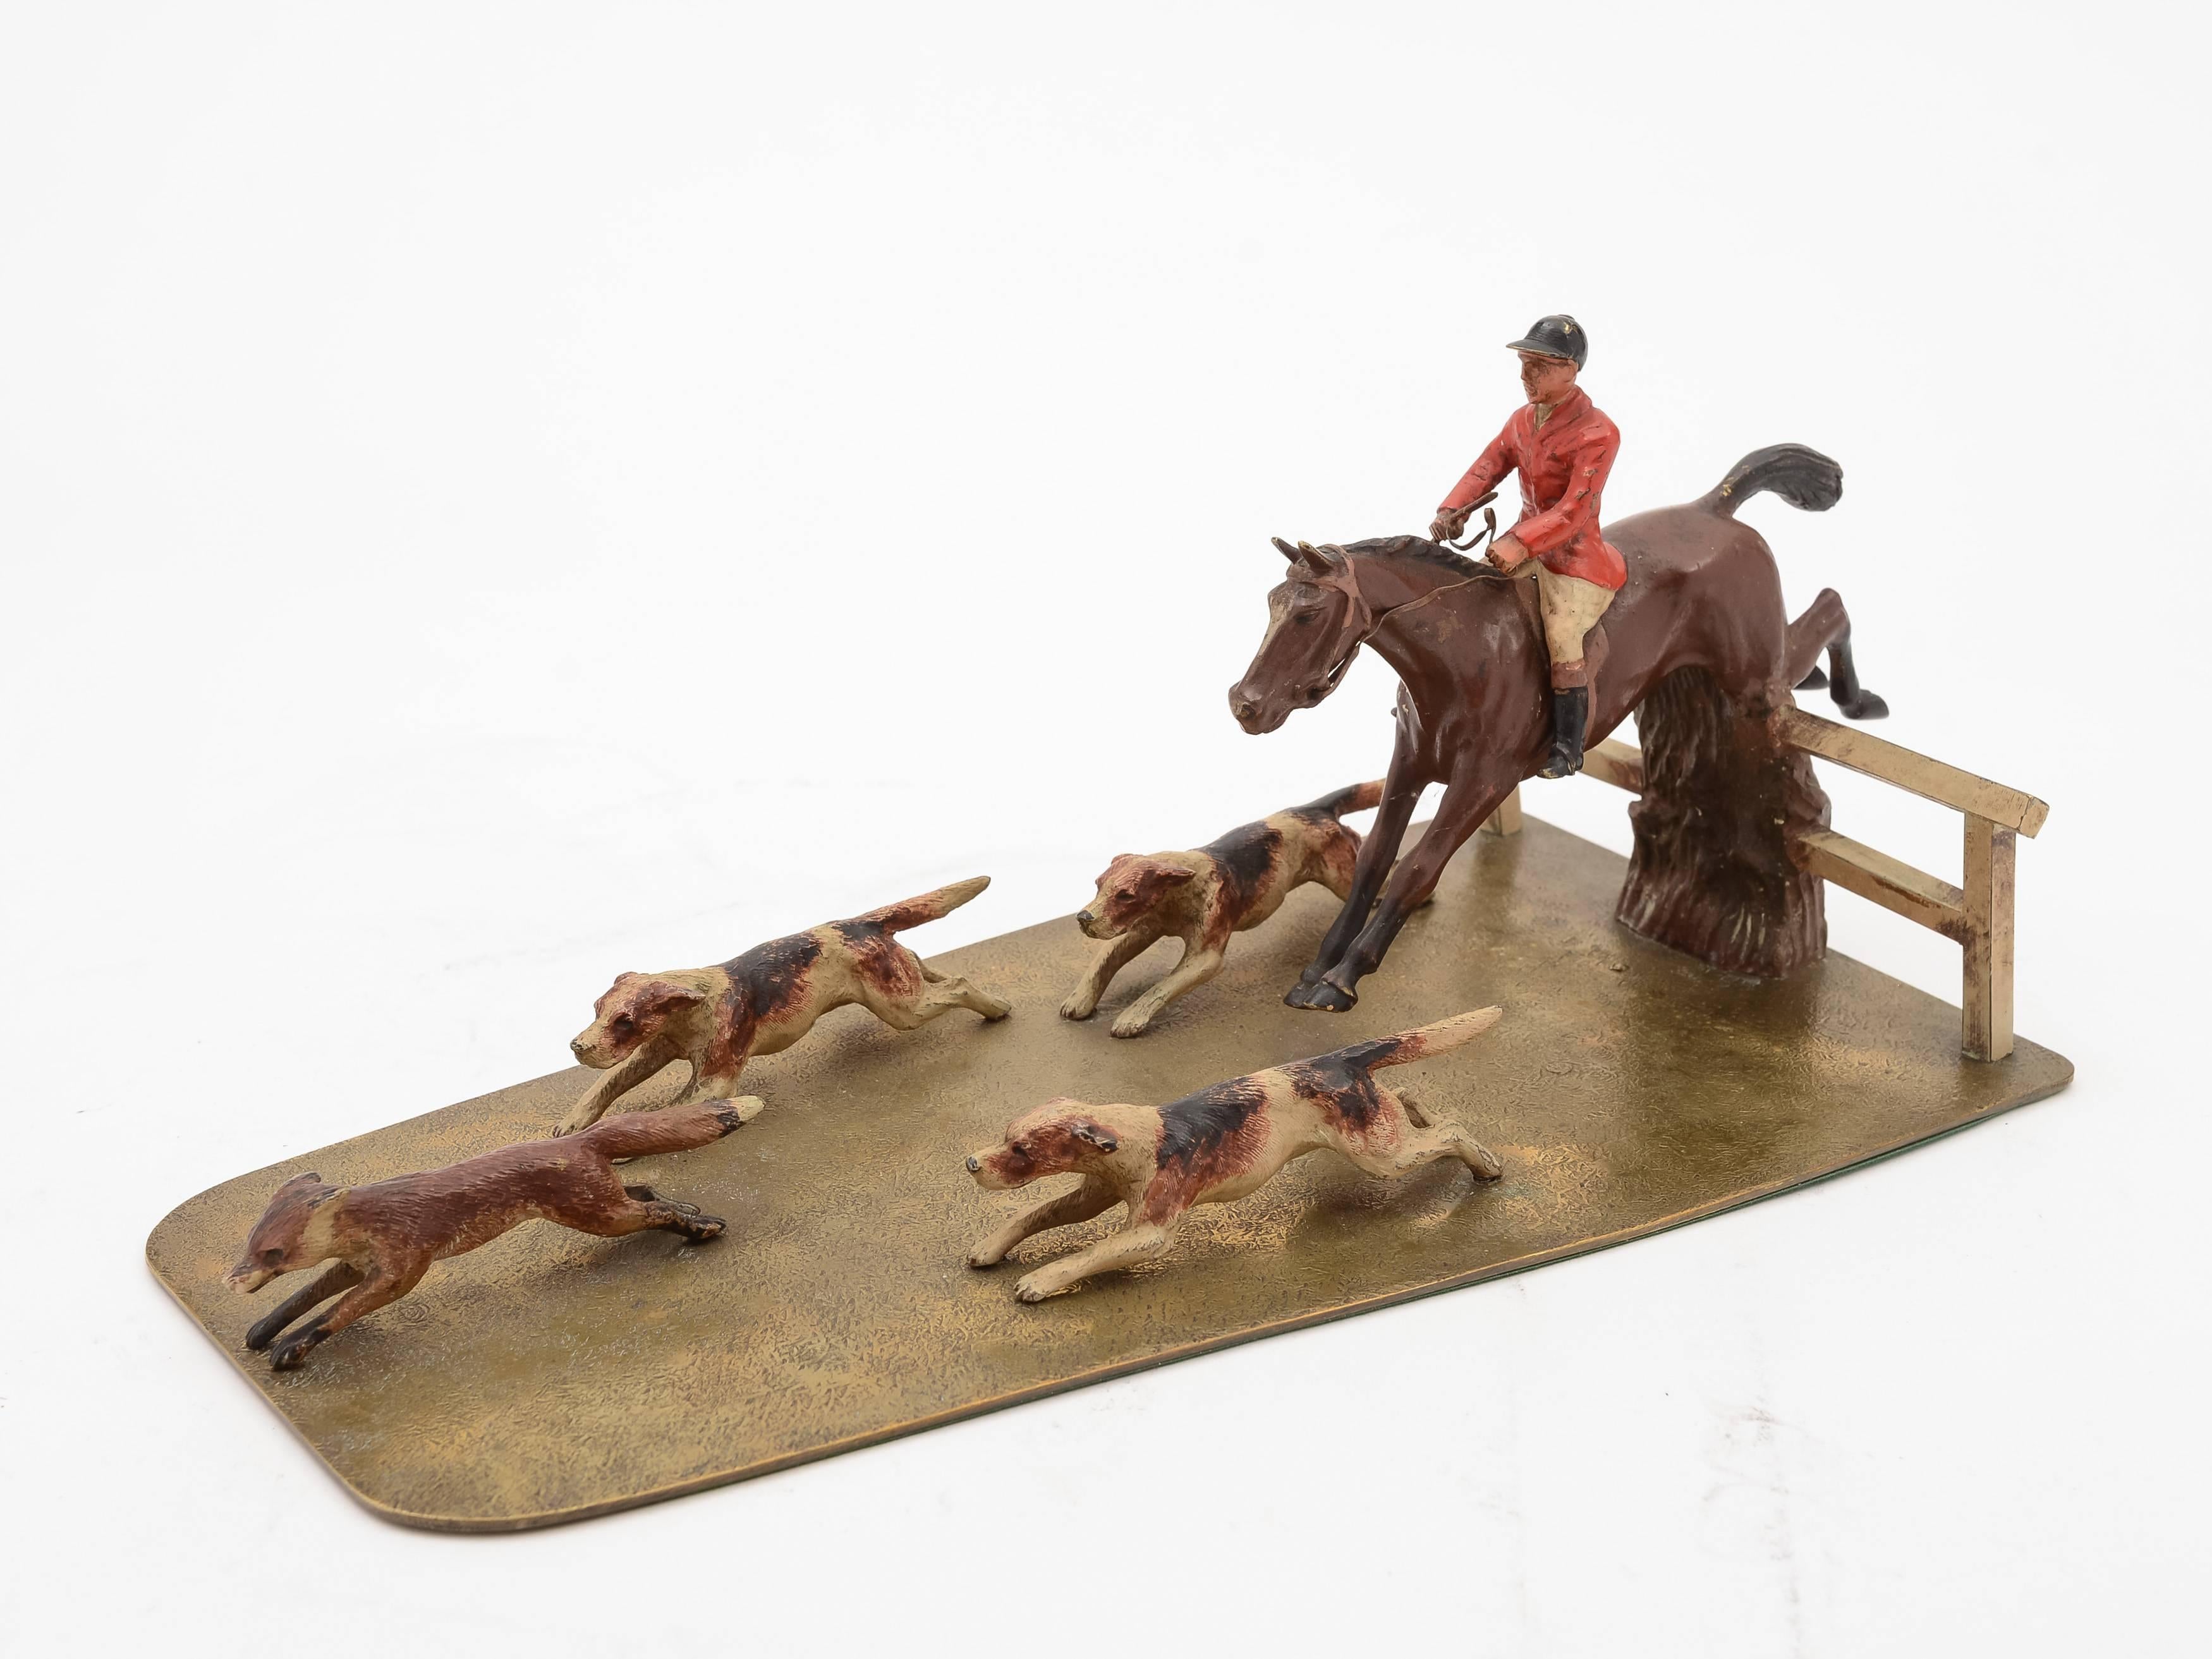 A fabulous European (probably Austrian: unmarked) cold painted, bronze/brass hunting desk ornament depicting huntsman taking a fence on a horse with his hounds chasing a fox, circa 1900.

Free worldwide delivery.

Measurements:
Height: 5 1/2